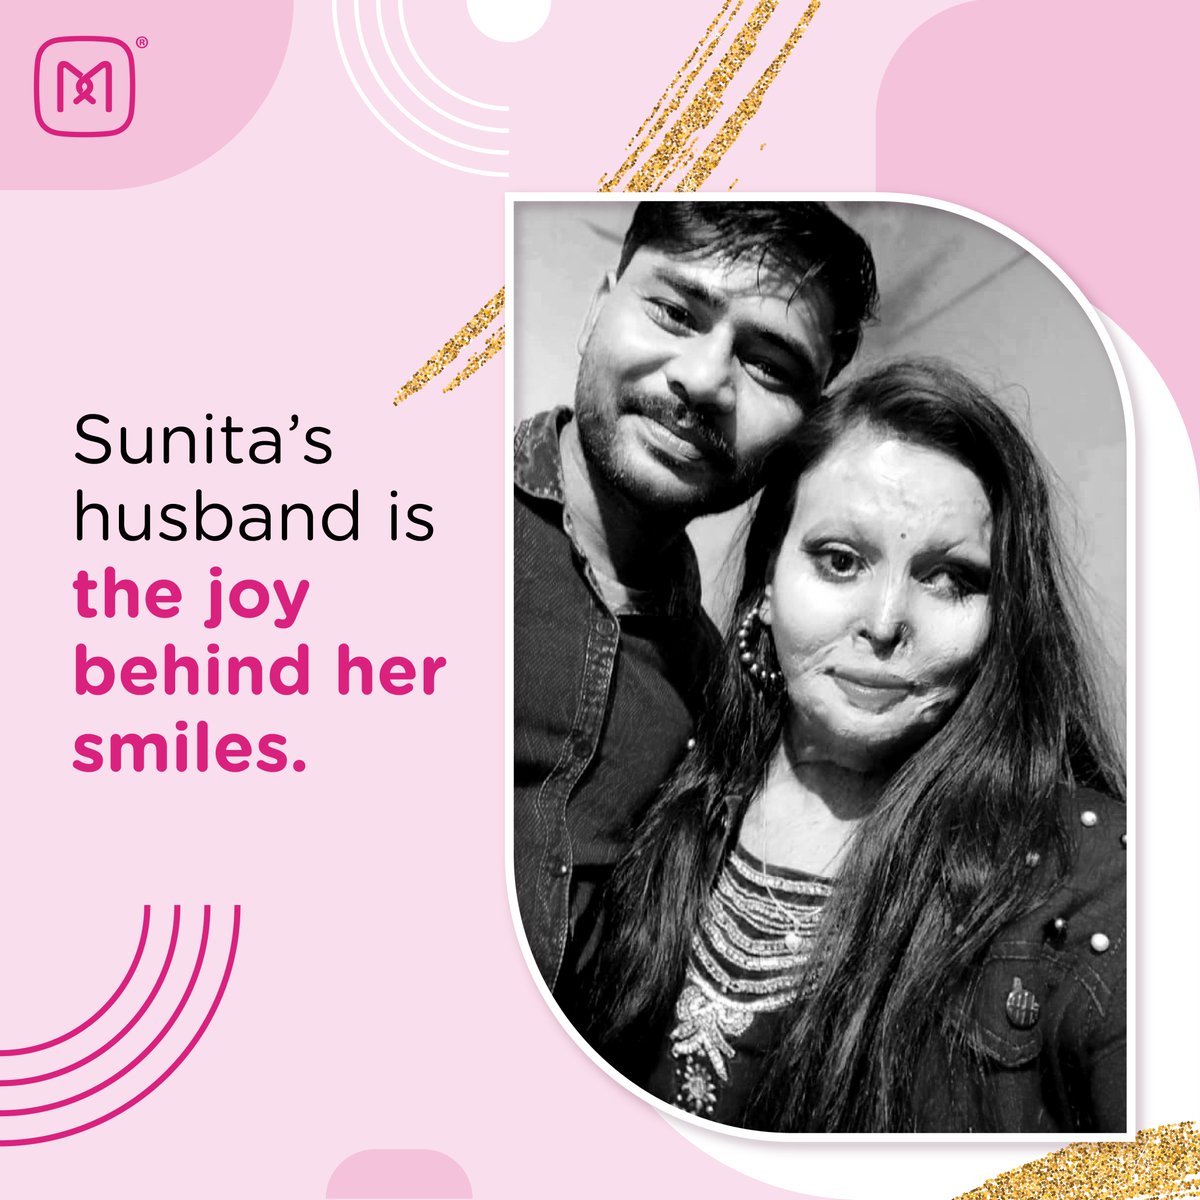 #Sunita’s husband has been her constant cheerleader through her triumphant journey. Hers may not have been a journey without hurdles but her husband entered her life and stood by her side, understanding that there is #StrengthInLove.